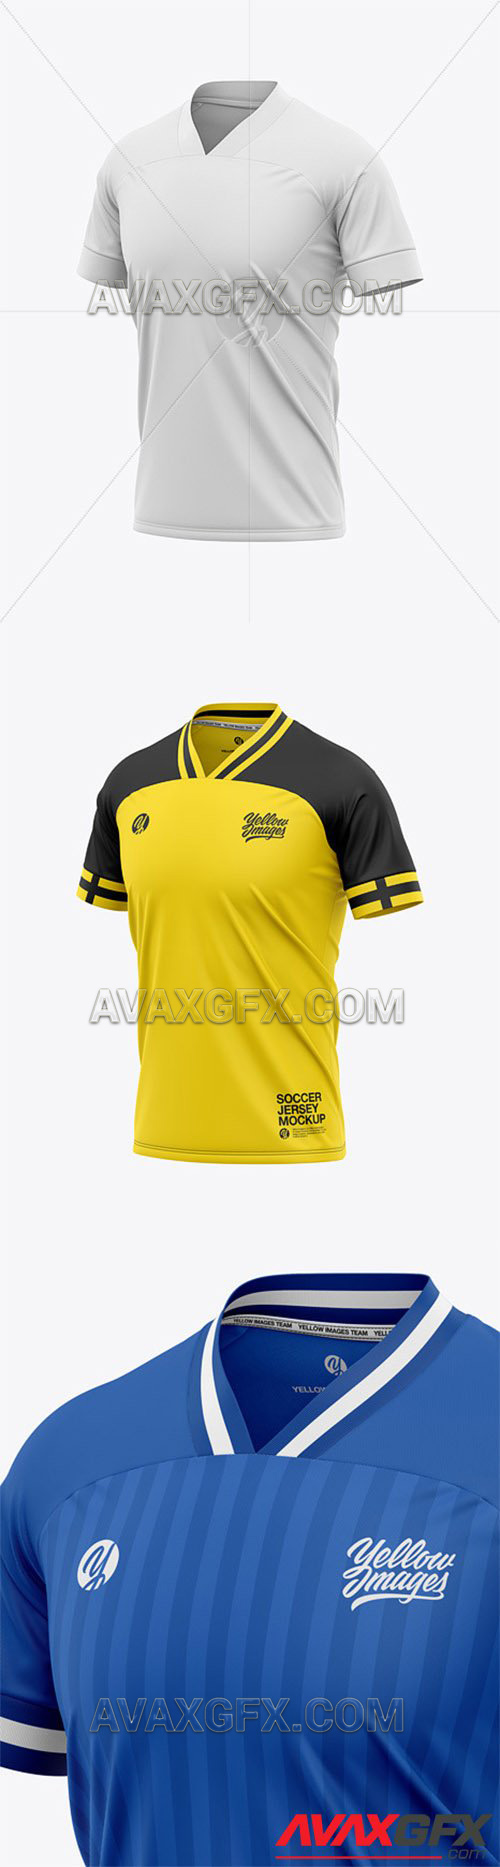 Download Men S Soccer Jersey T Shirt Mockup Front Half Side View 60833 Avaxgfx All Downloads That You Need In One Place Graphic From Nitroflare Rapidgator